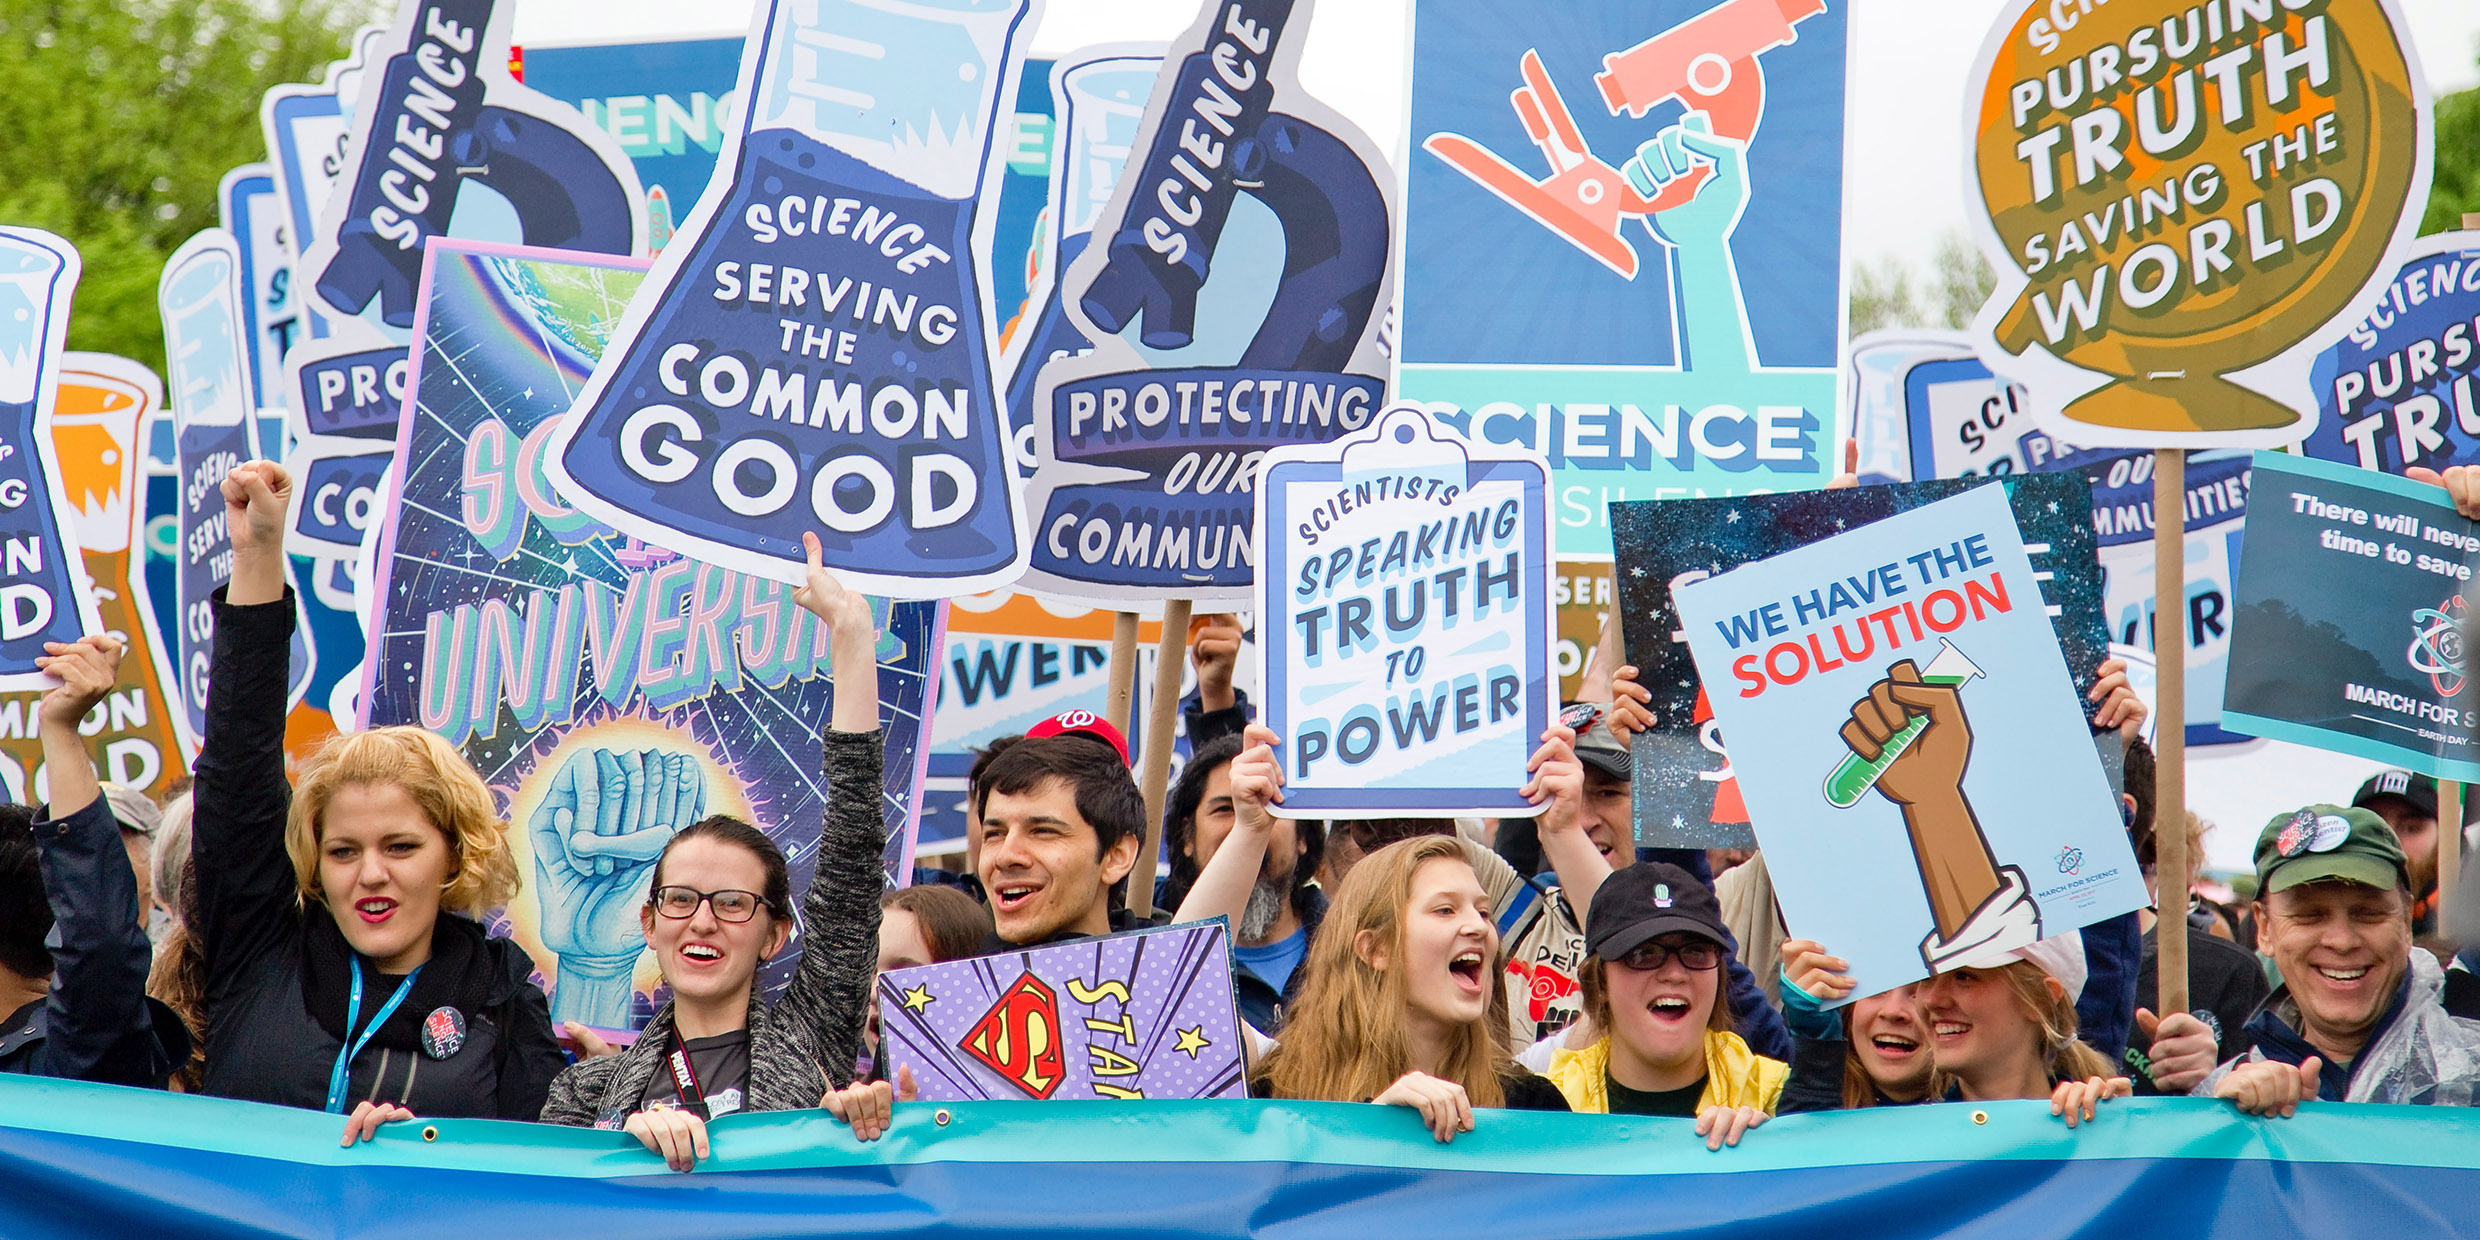 Image of demonstrators holding signs in support of science